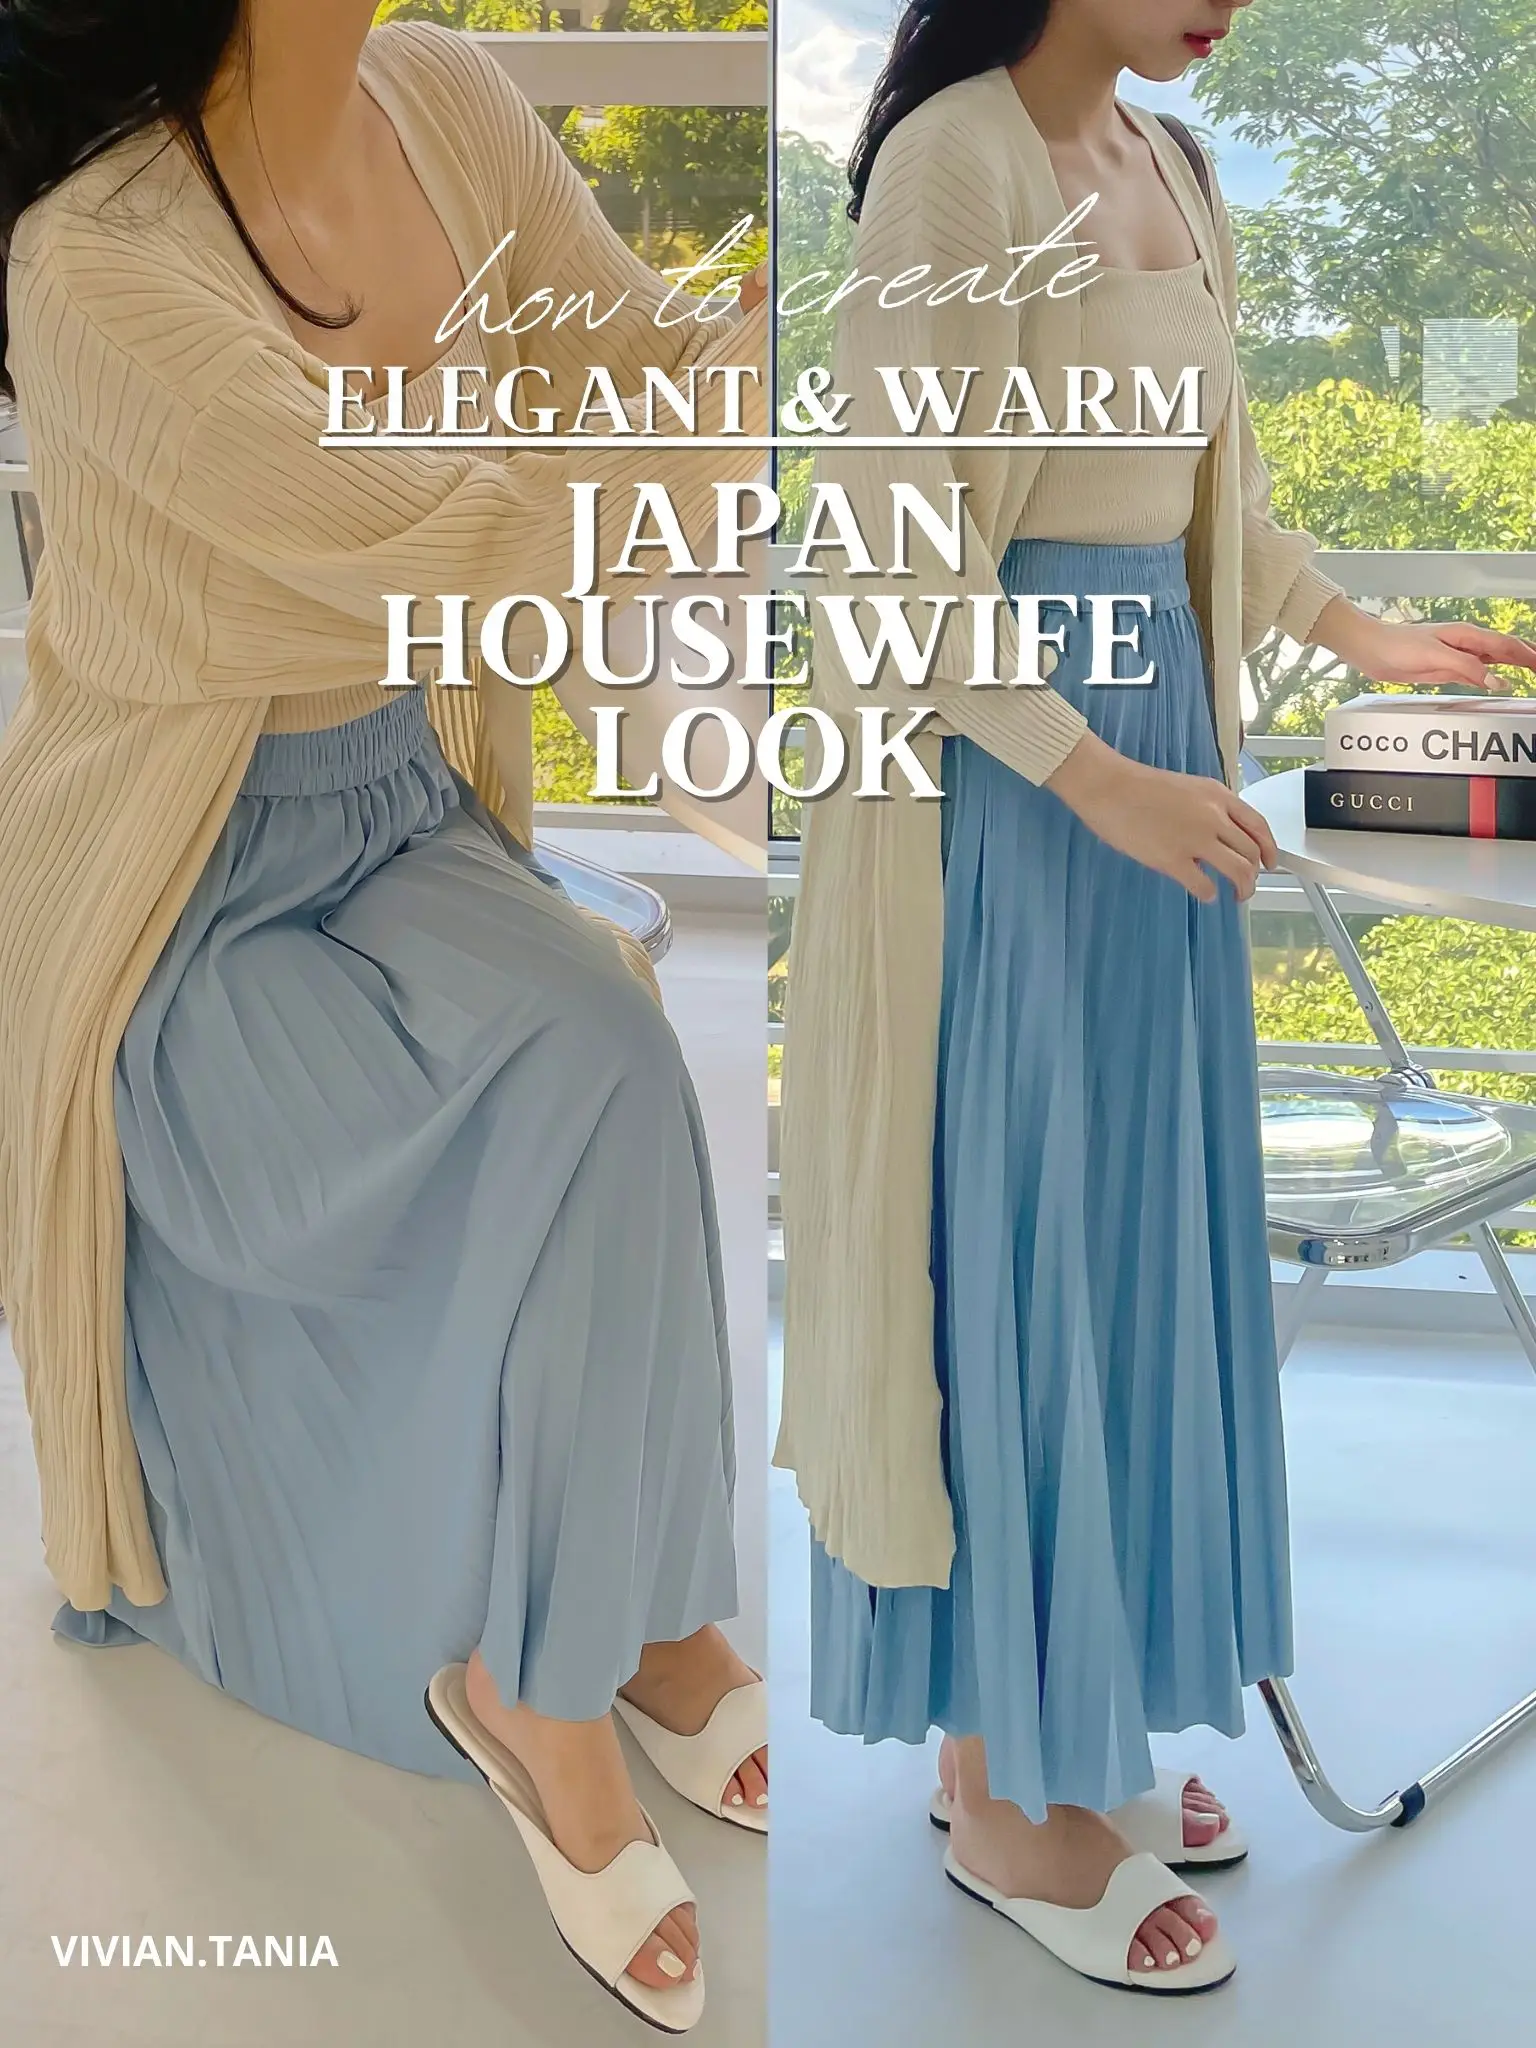 How To Create Japan Housewife Look Gallery posted by Vivian Lemon8 pic pic